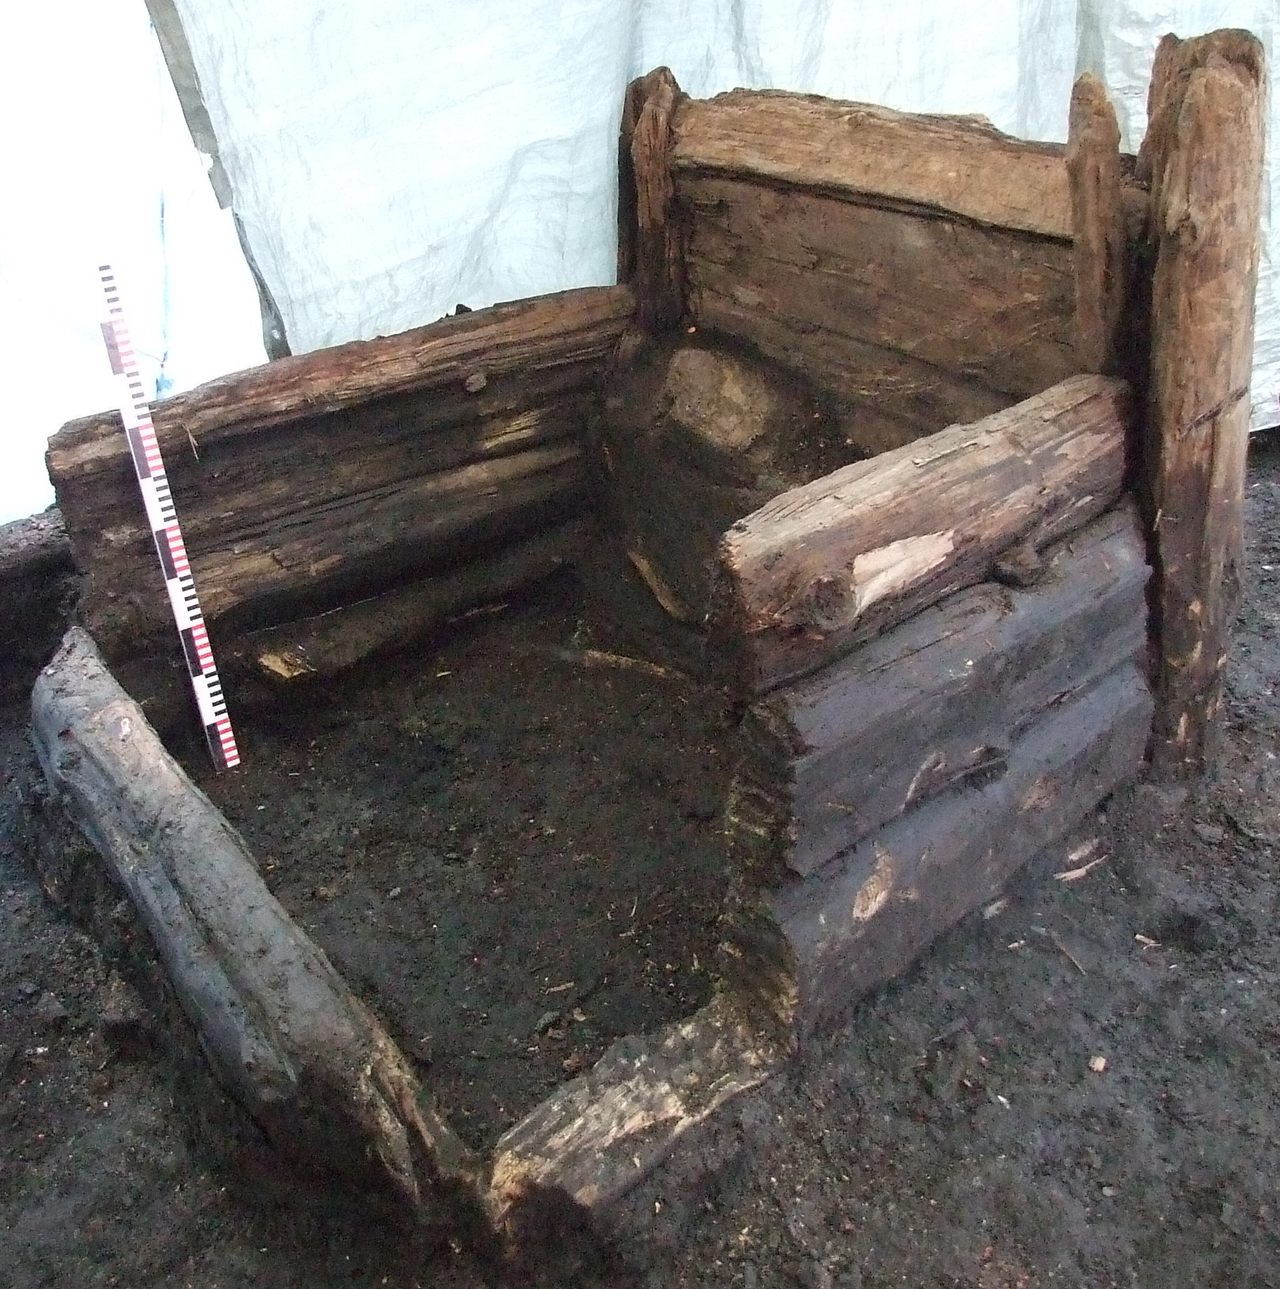 Modern technology is extracting lost secrets from this 14th-century wooden latrine in Riga, Latvia.